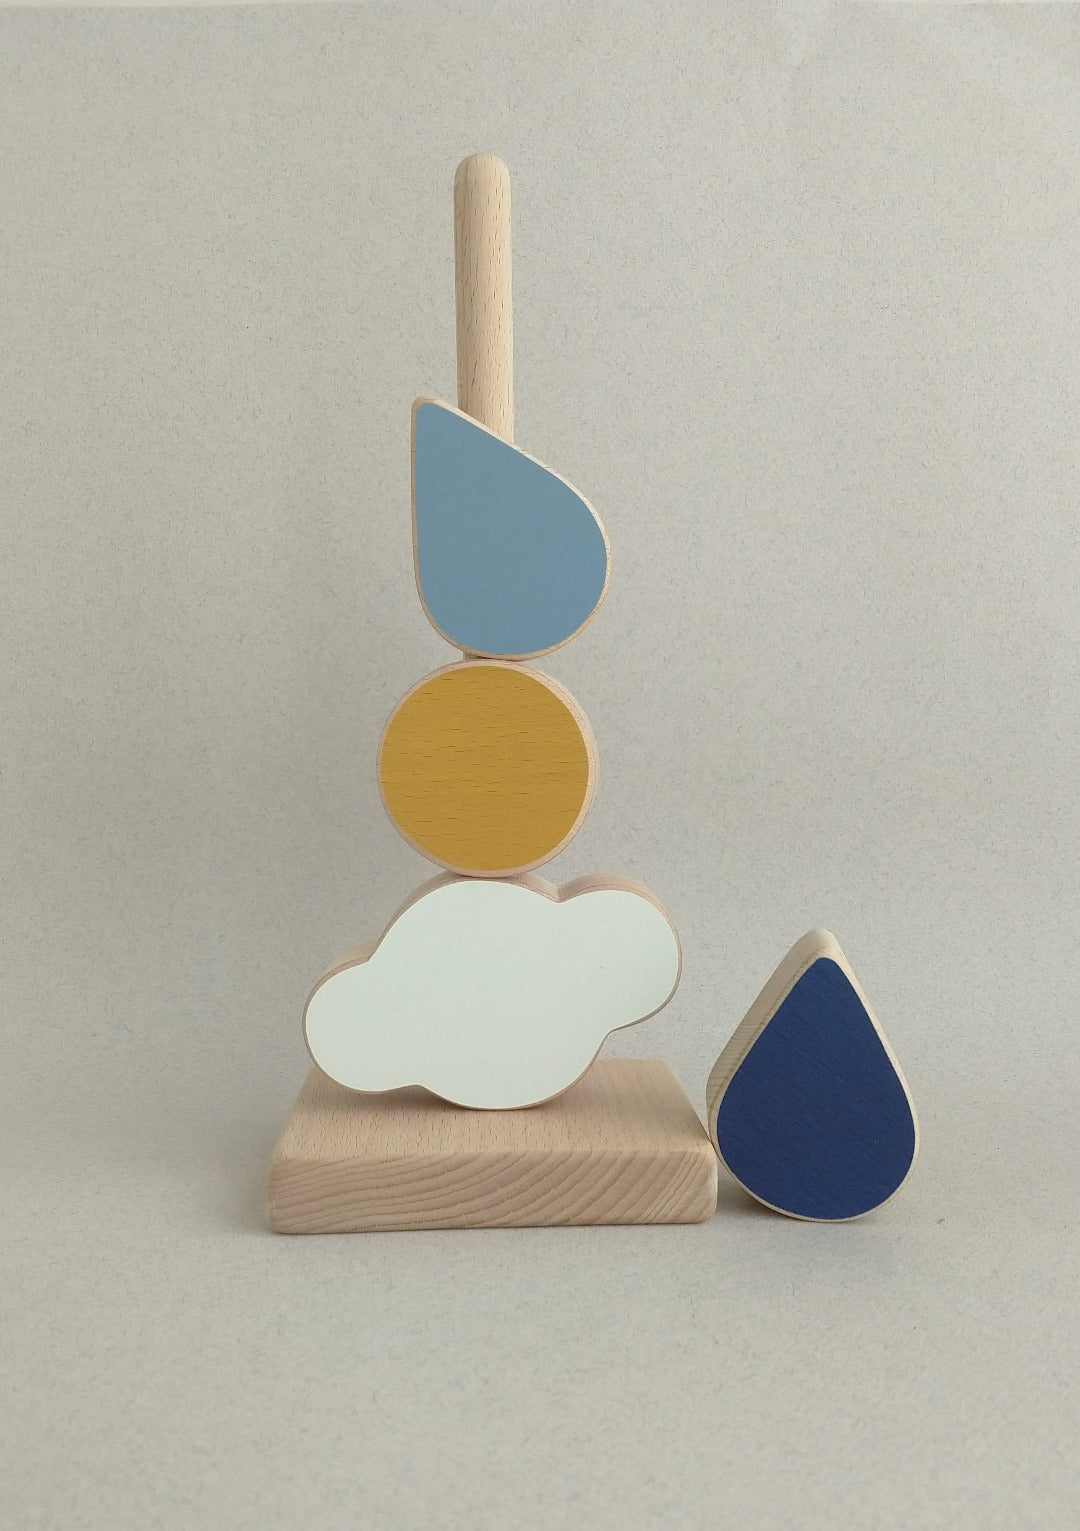 The toy combines a cloud, a sun and two blue raindrops in vivid colors with satin smooth natural wood surfaces.